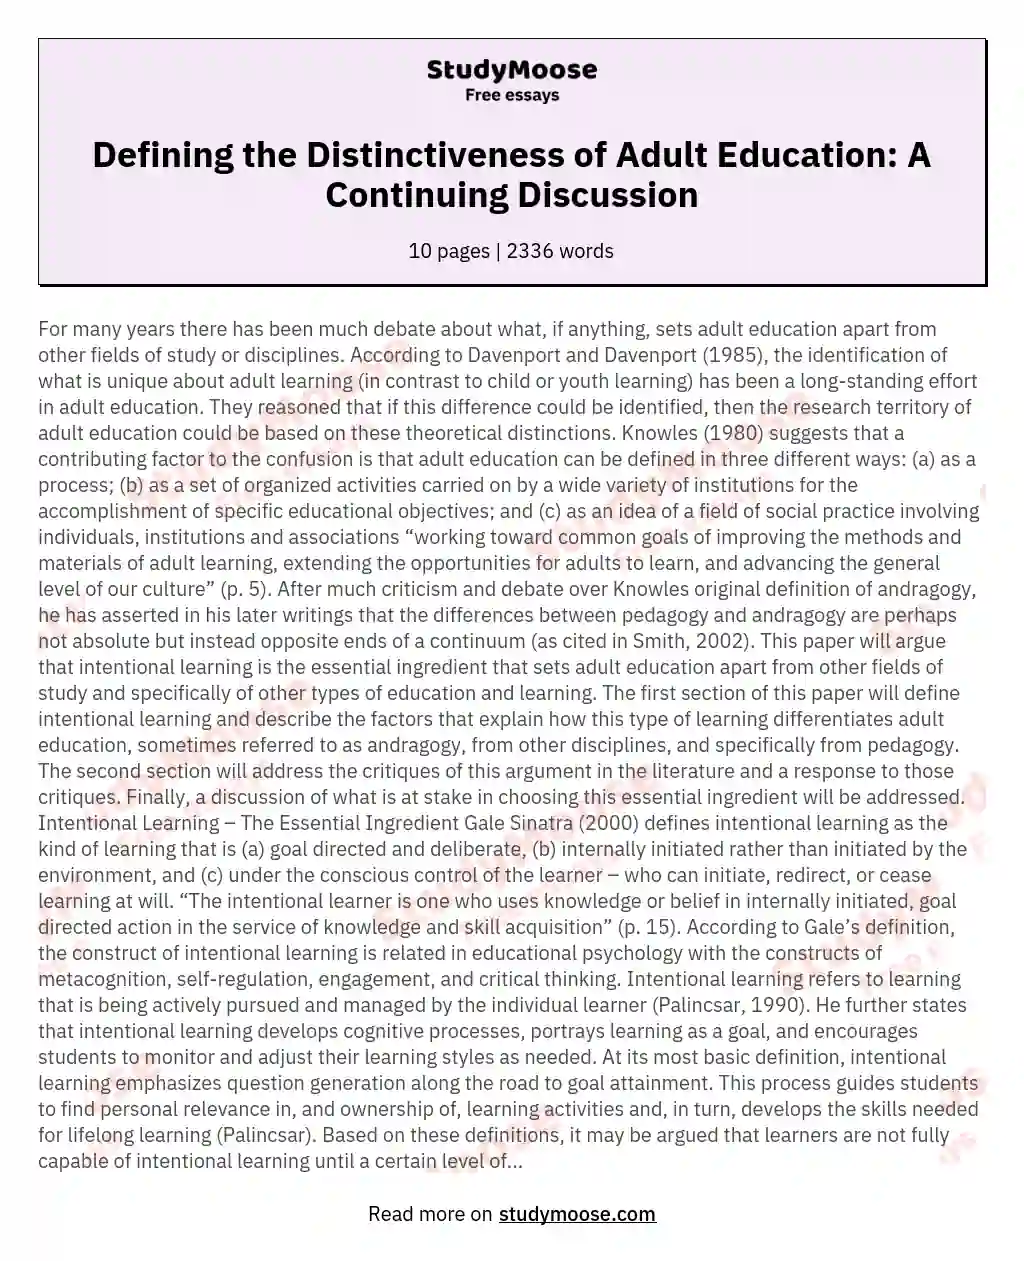 Defining the Distinctiveness of Adult Education: A Continuing Discussion